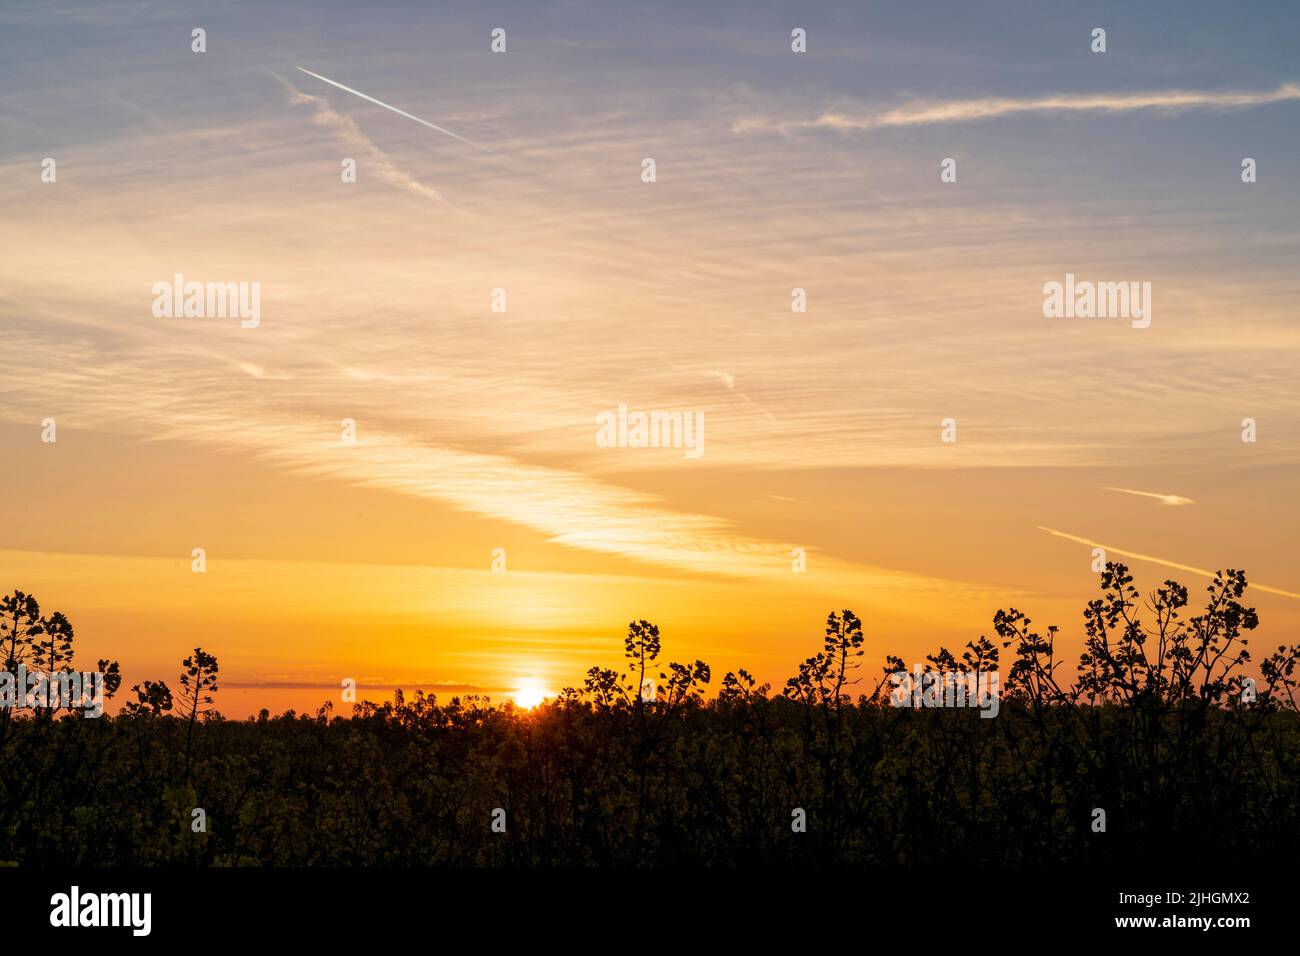 Close up of rapeseed, oilseed, almost silhouetted against the rising sun and a yellow orange sky above with brands of altocumulus stratiformis clouds. Stock Photo